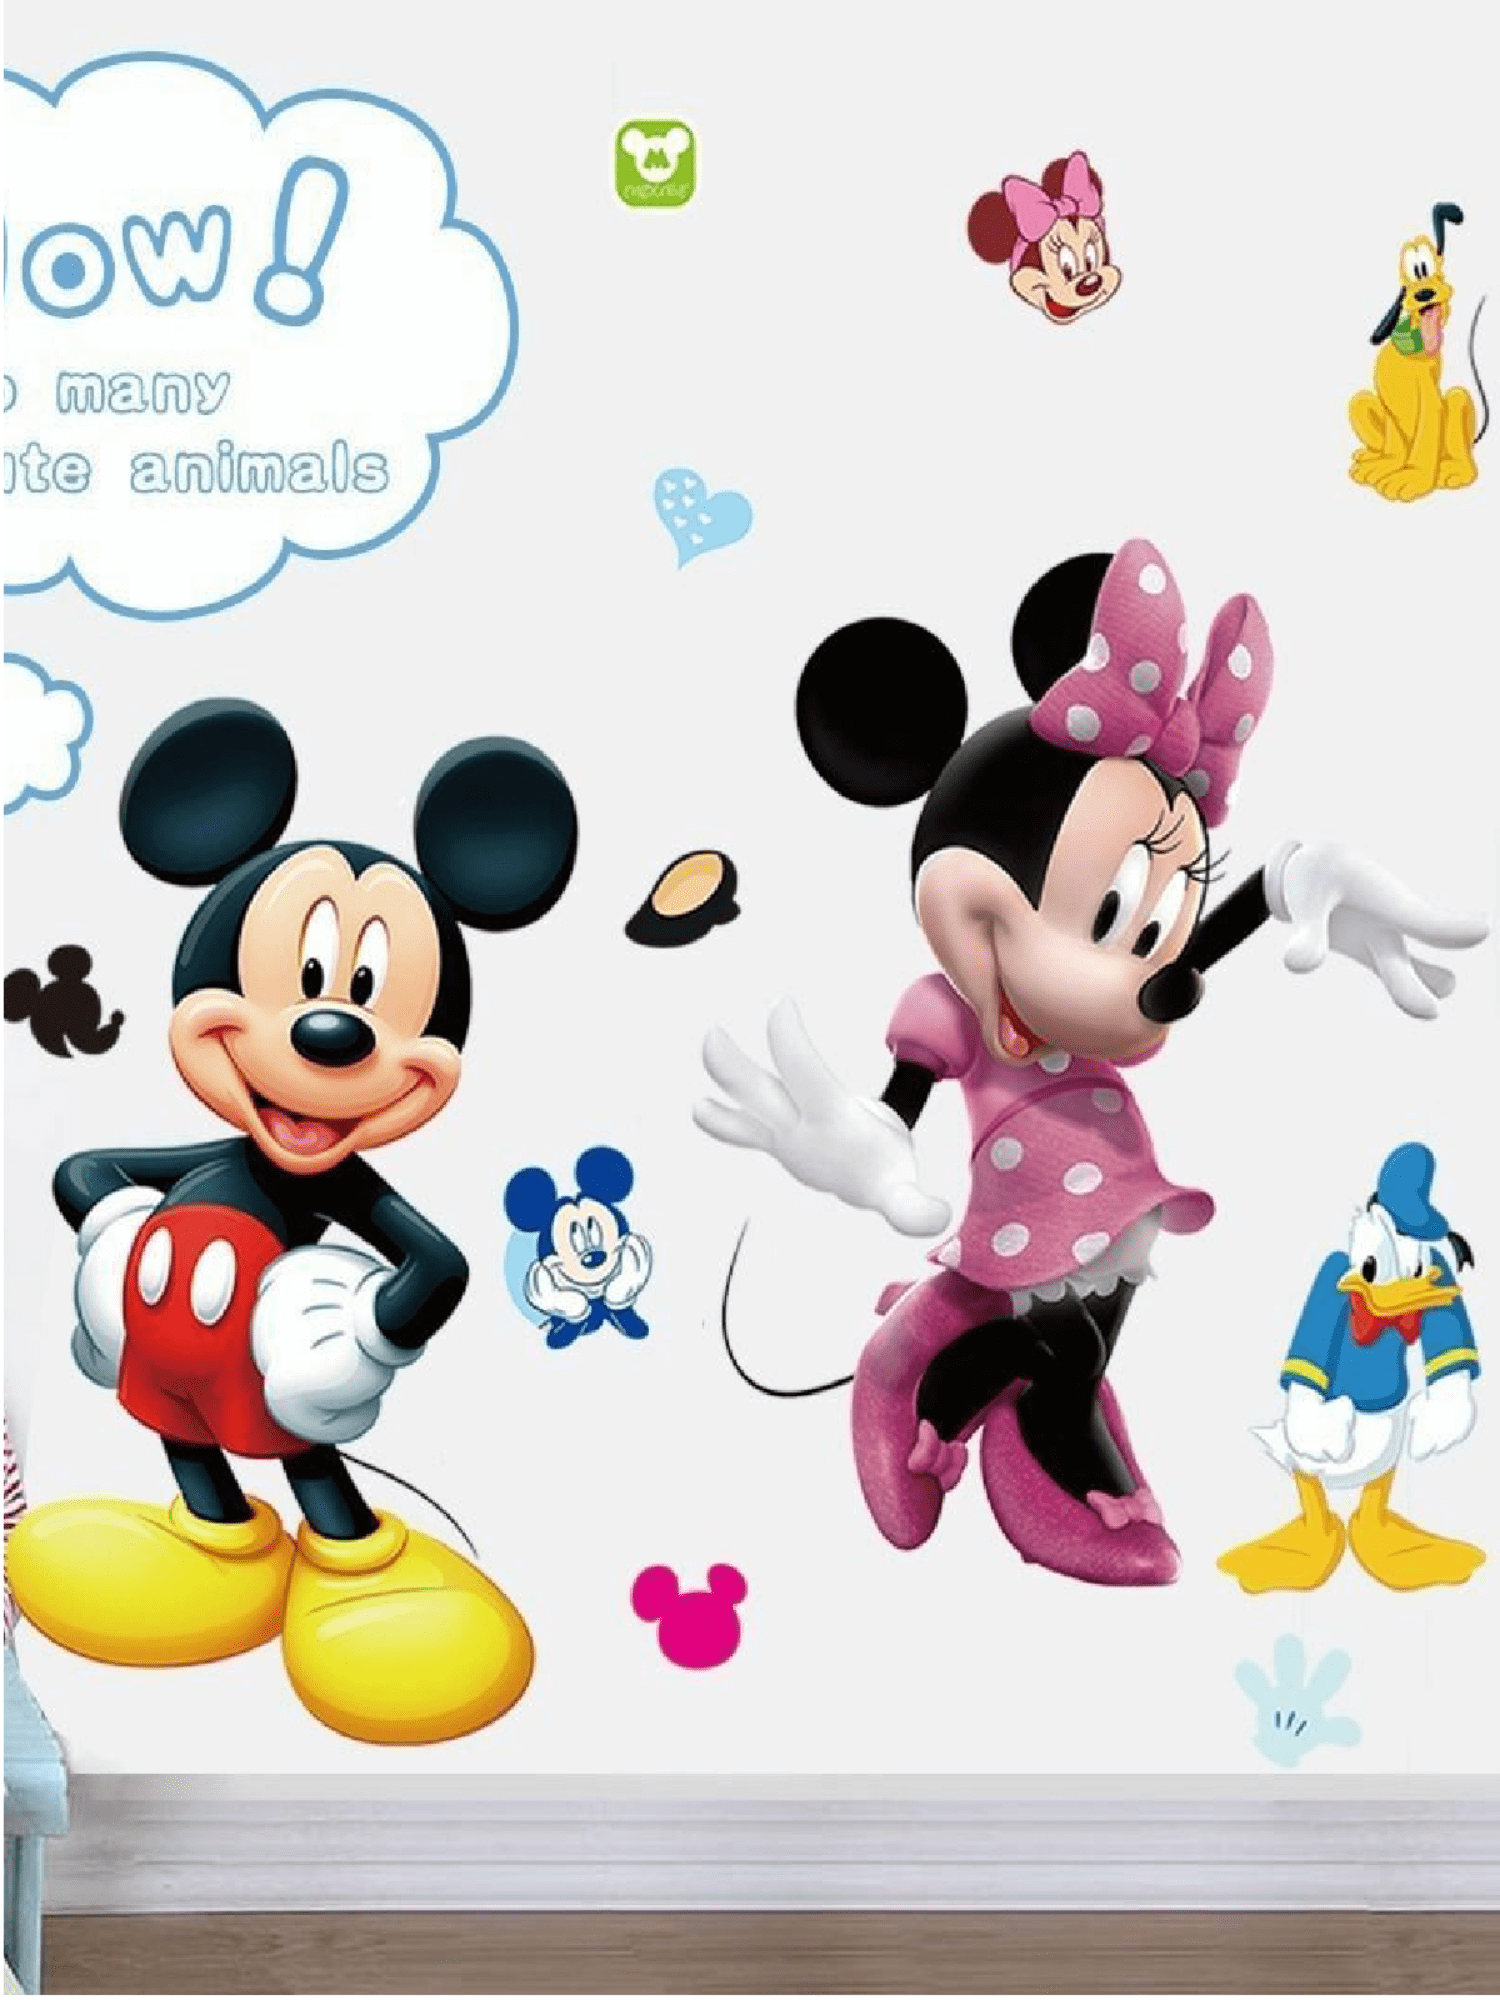 Details about   New Disney MINNIE MOUSE BOW-TIQUE 33 Wall Decals Girls BedRoom Decor Stickers 